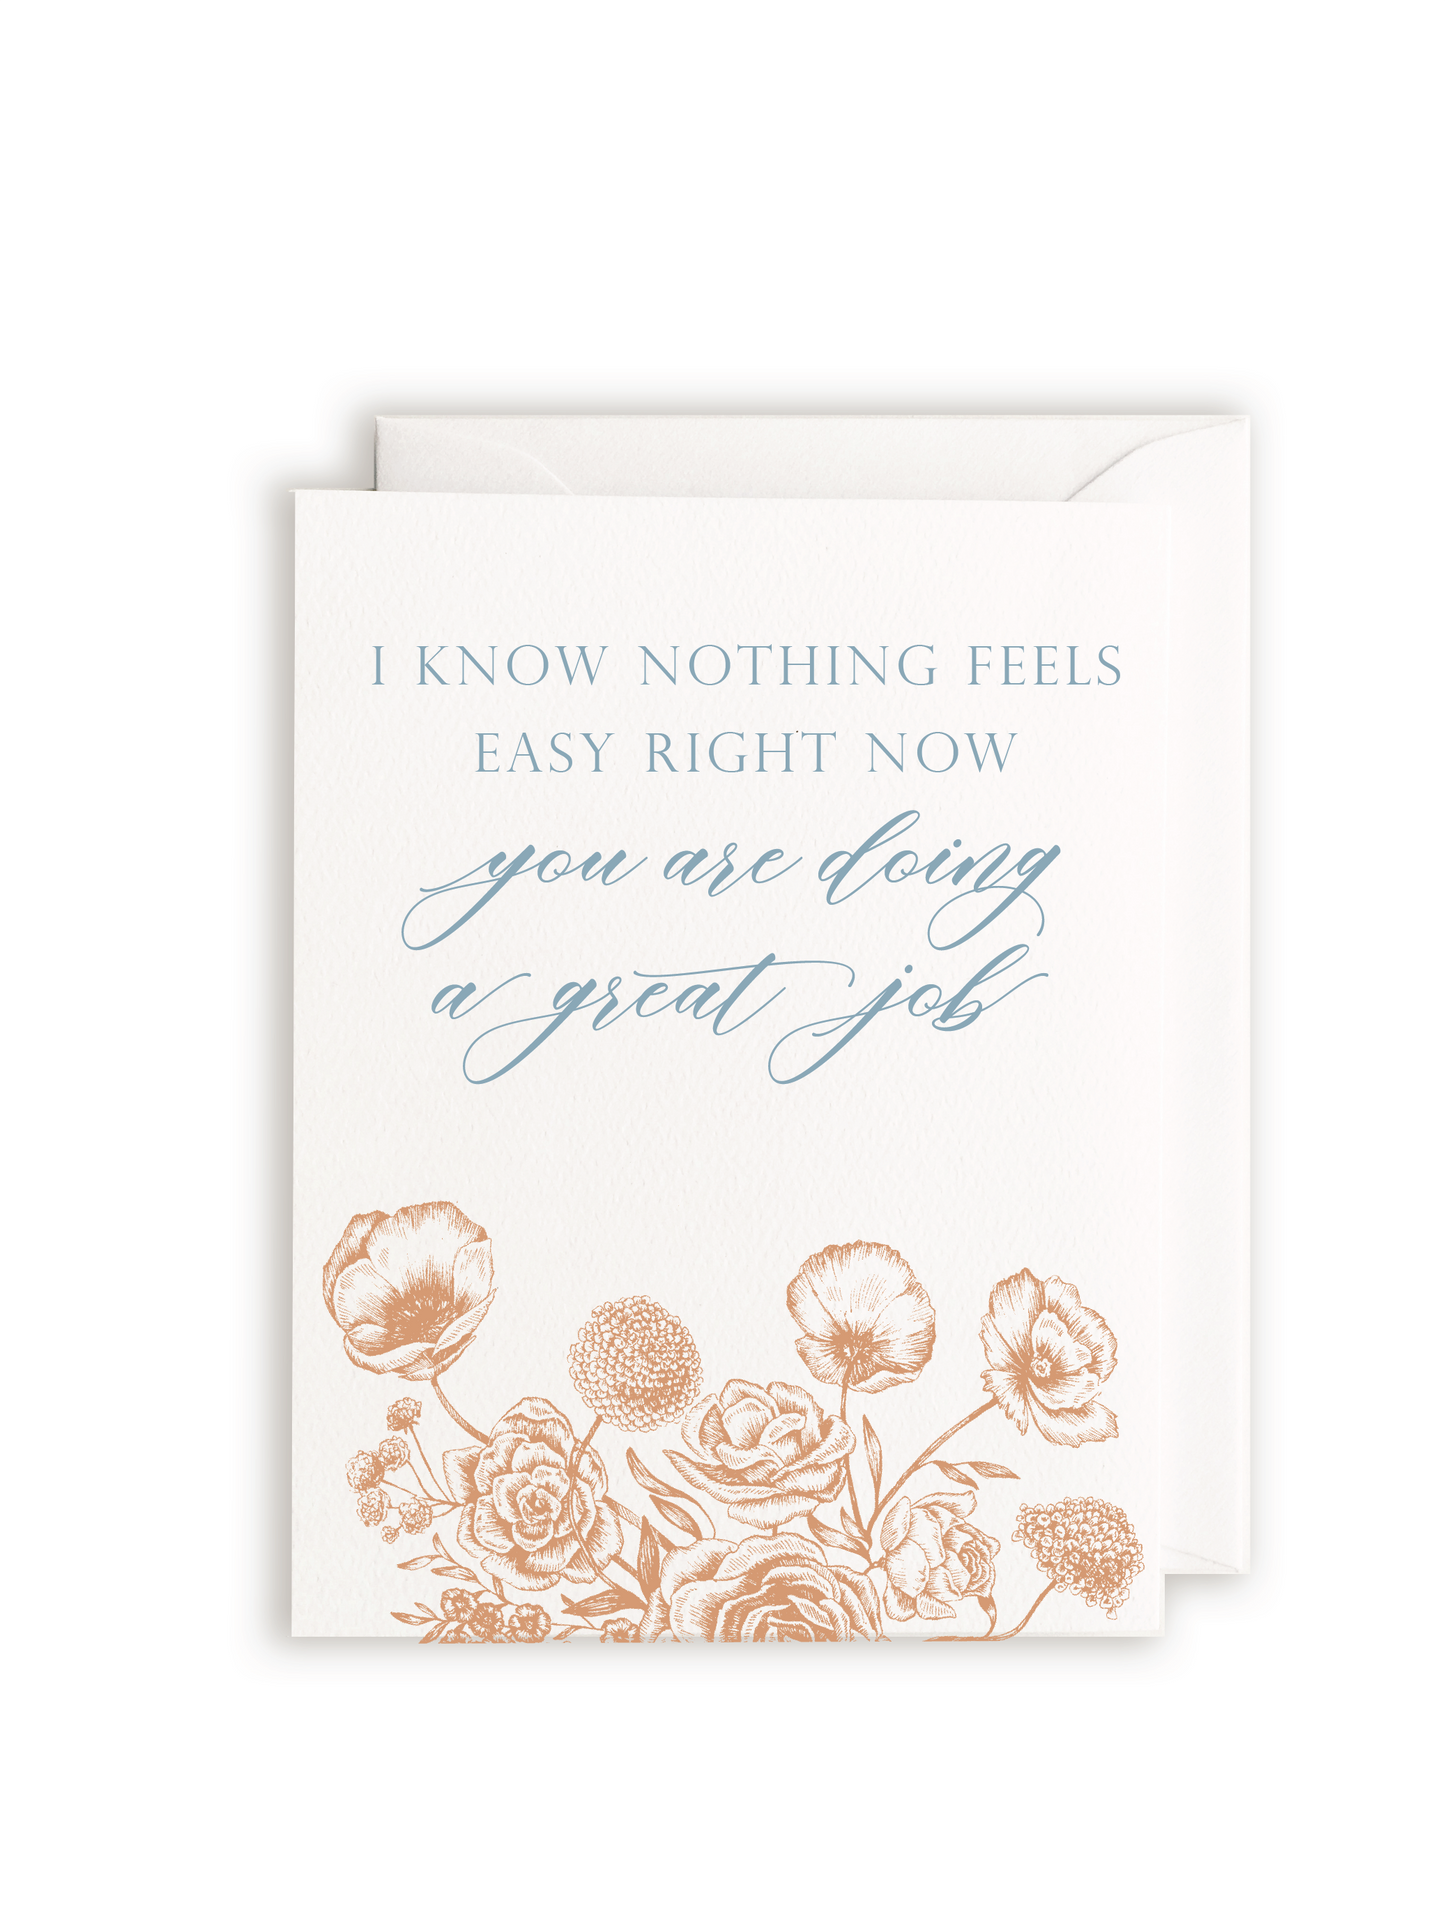 You're Doing a Great Job - Encouragement Greeting Card - Rust Belt Love Paperie